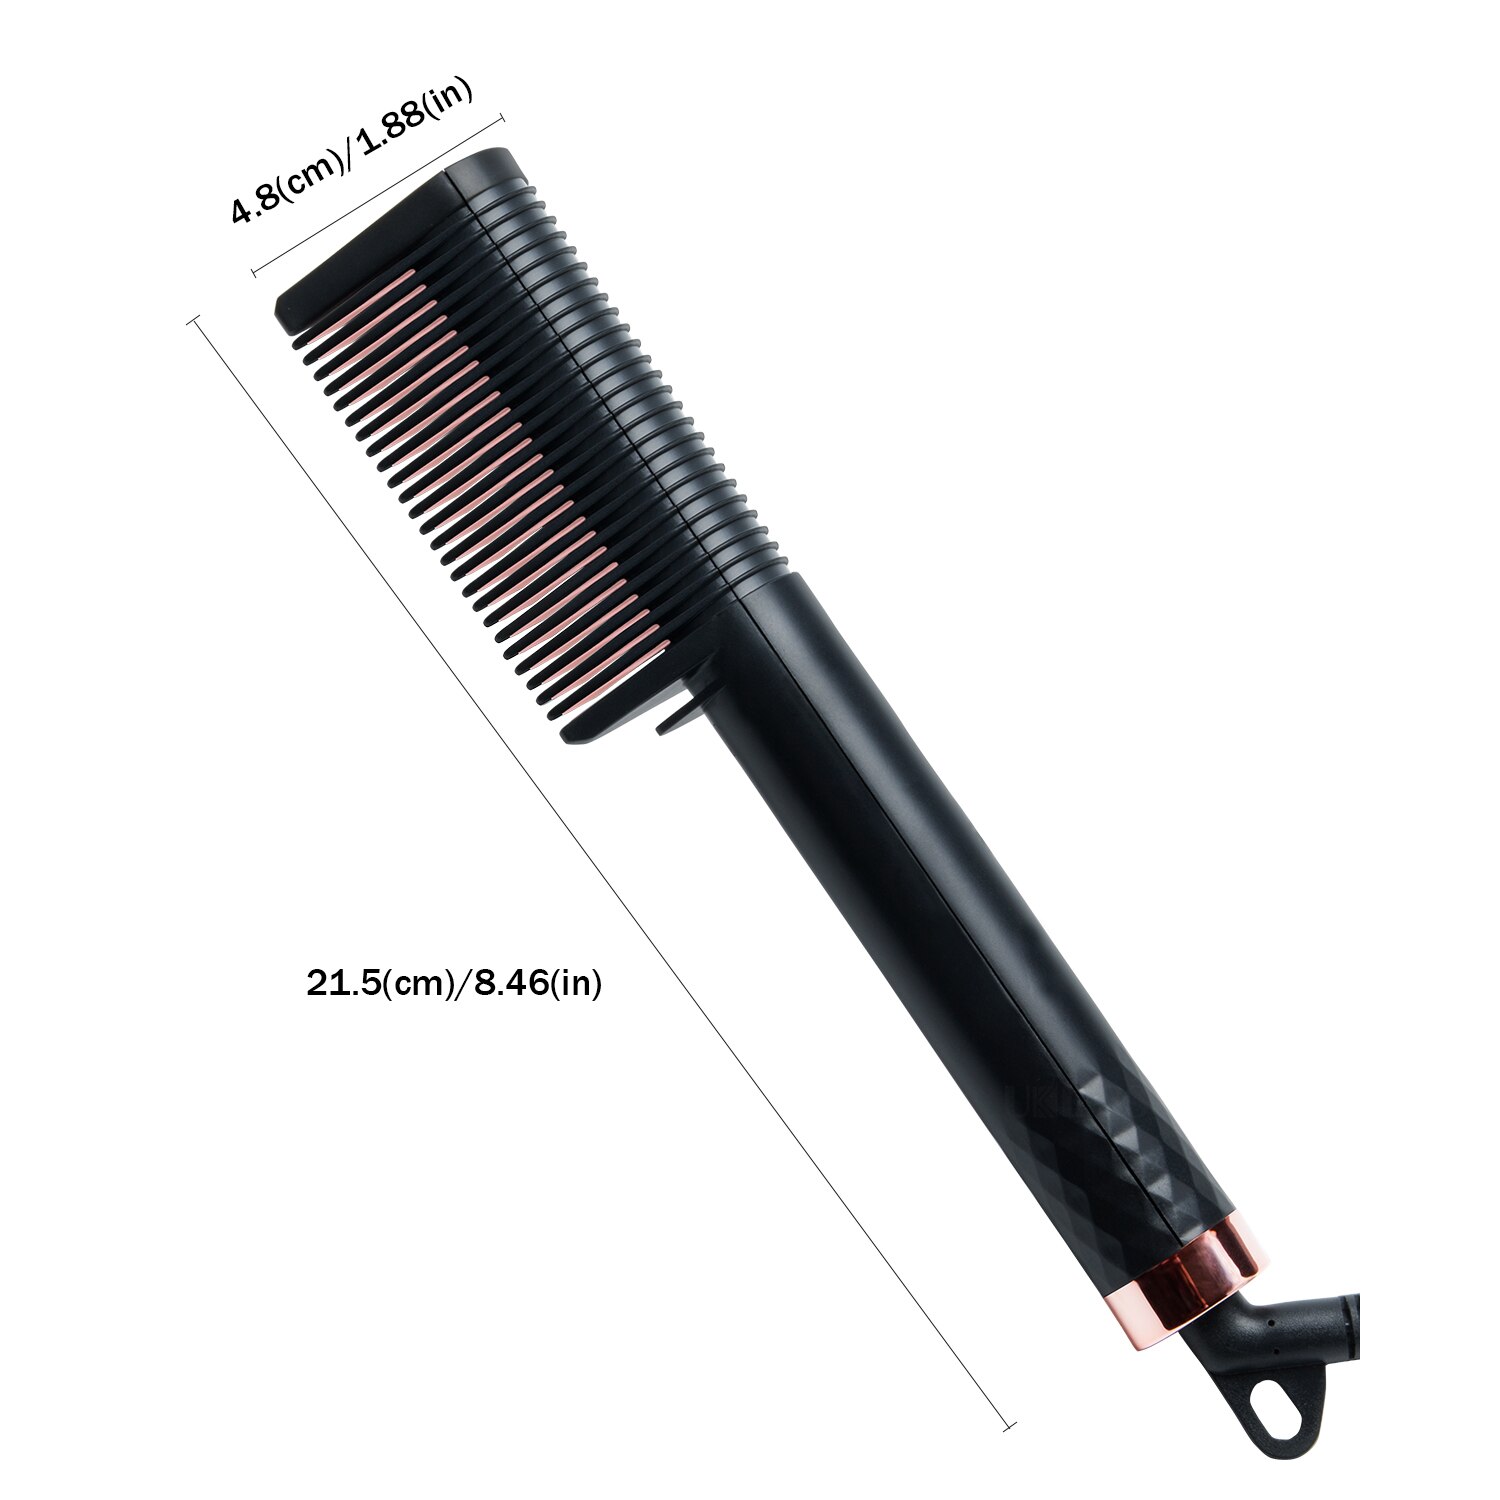 Newly Electric Hair Straightening Brush and Curler Comb Ceramic Ionic Anti Frizz&Scald Beauty Hair Styling Tool: UK